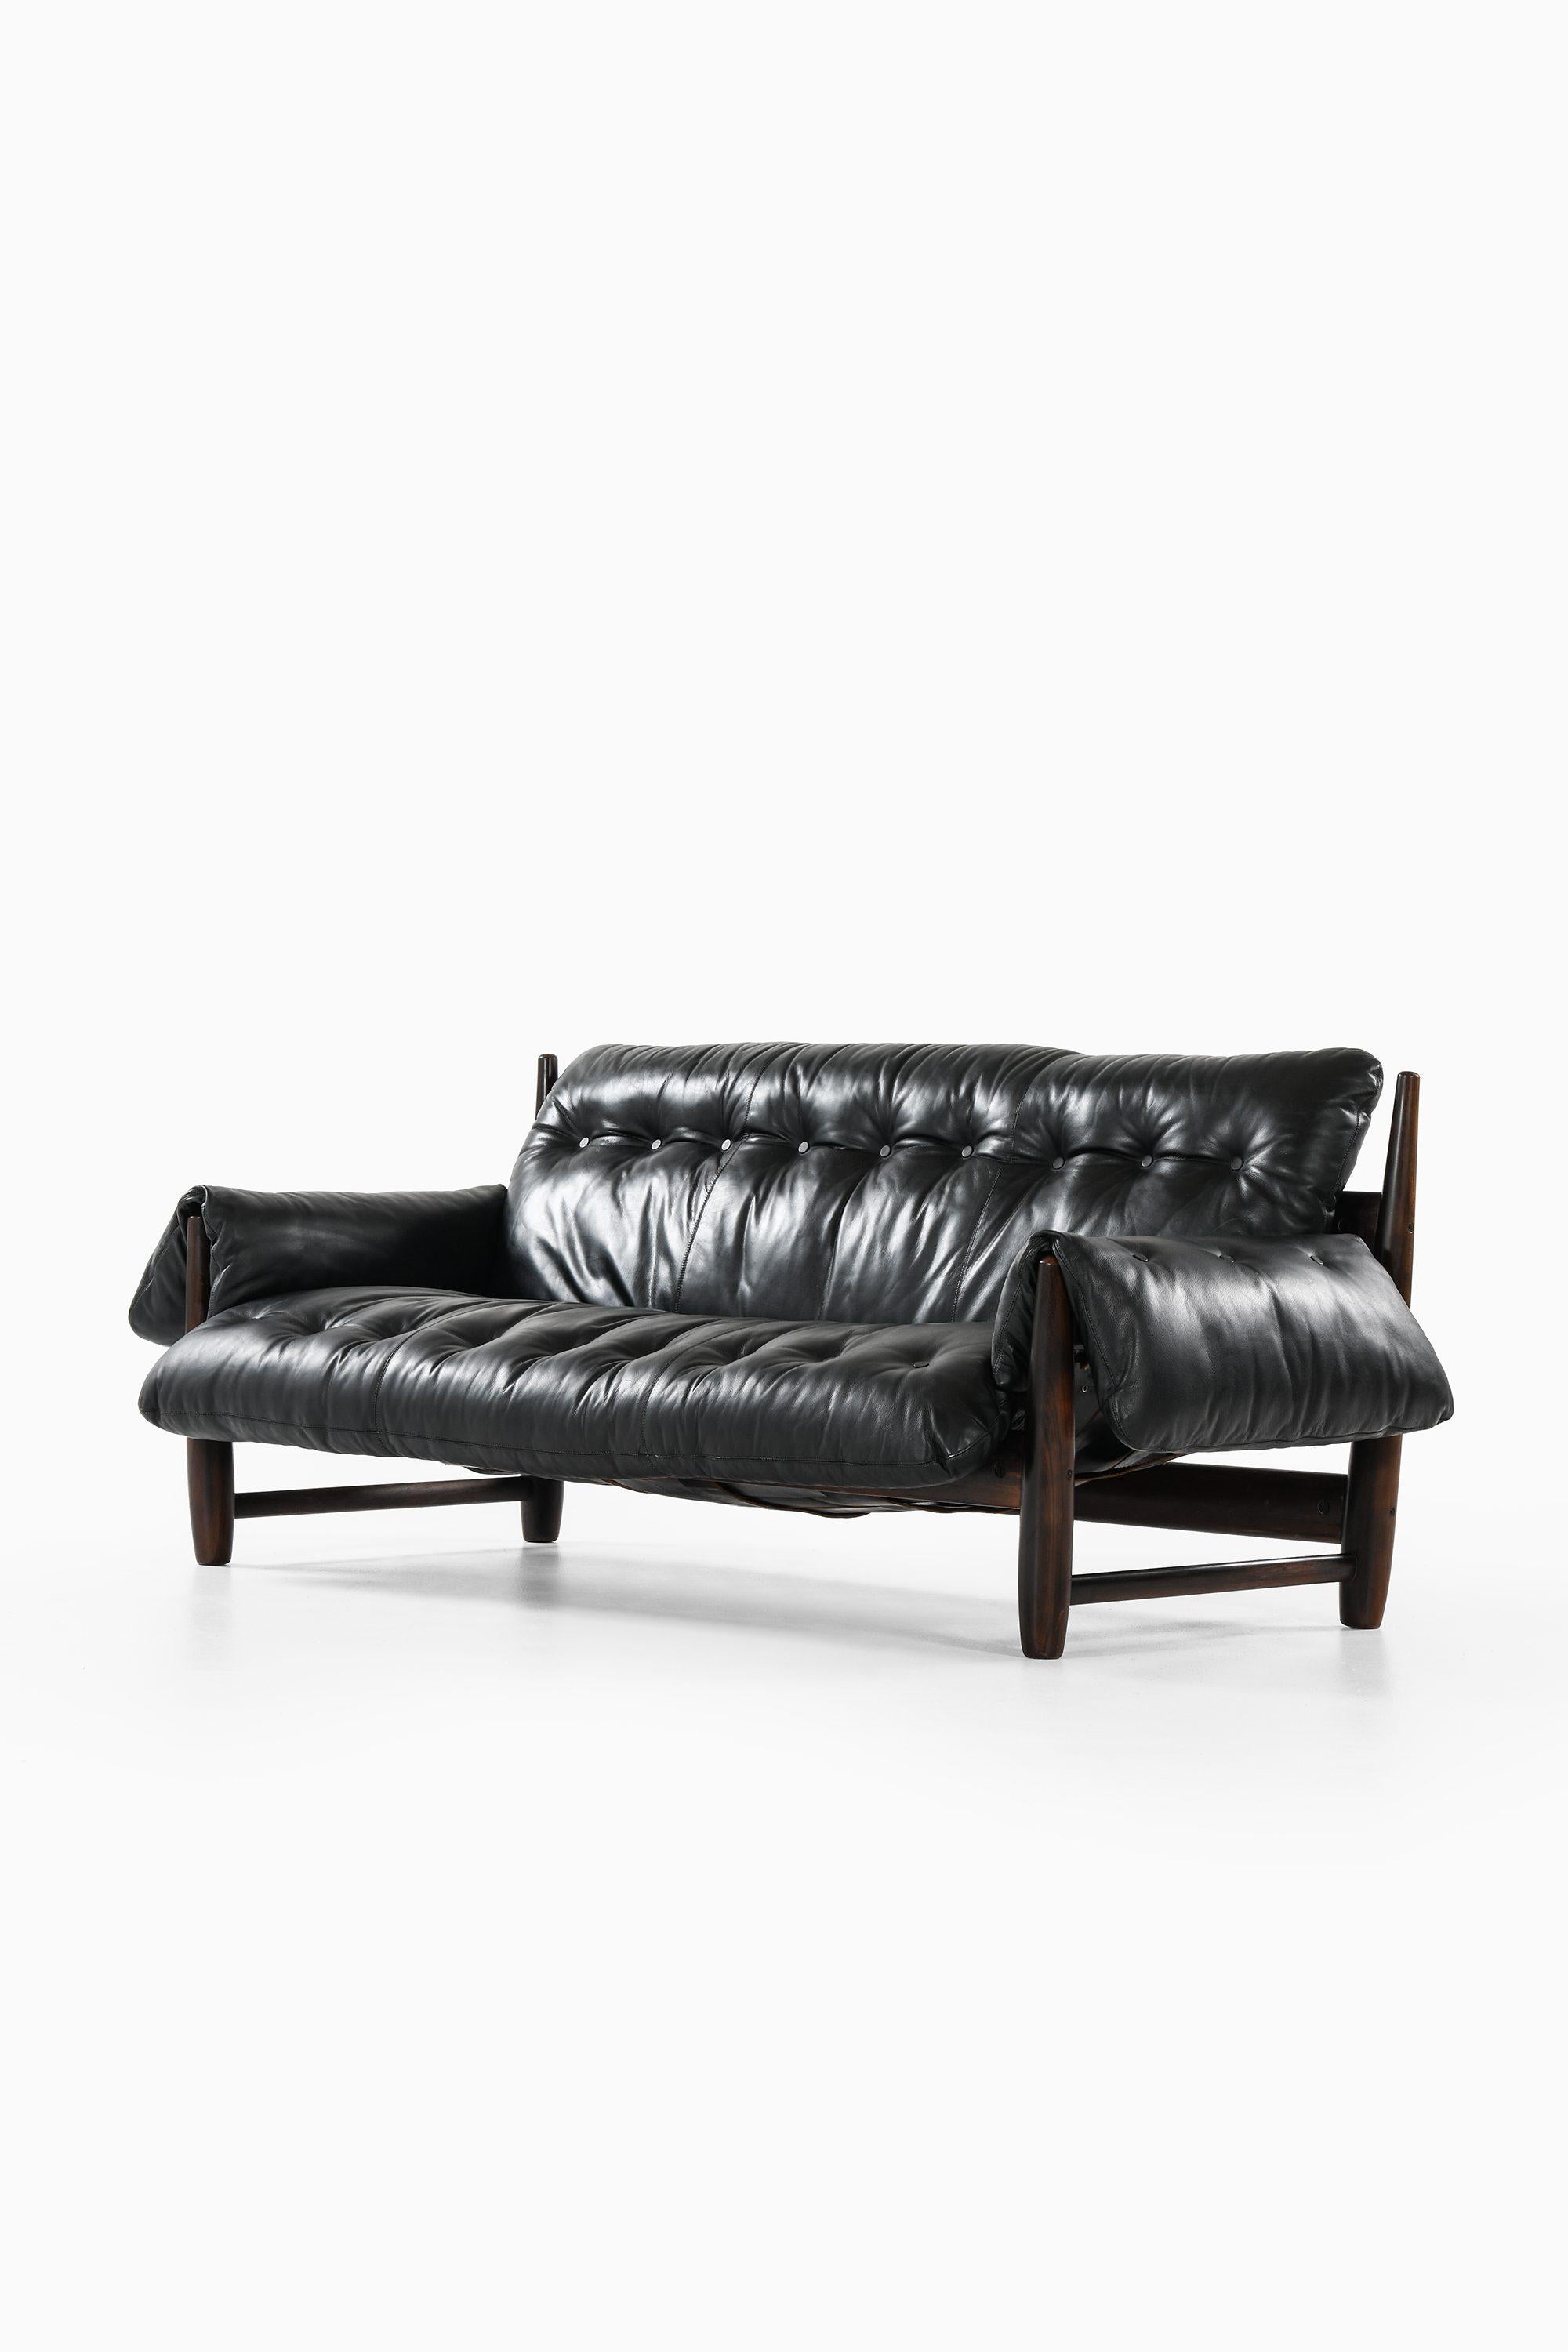 Sofa in Jacaranda and Leather by Sergio Rodrigues, 1957

Additional Information:
Material: Jacaranda and leather
Style: Mid century, Brazil
Rare sofa model Mole
Produced in Brazil
Dimensions (W x D x H): 195 x 95 x 76 cm
Seat Height: 35